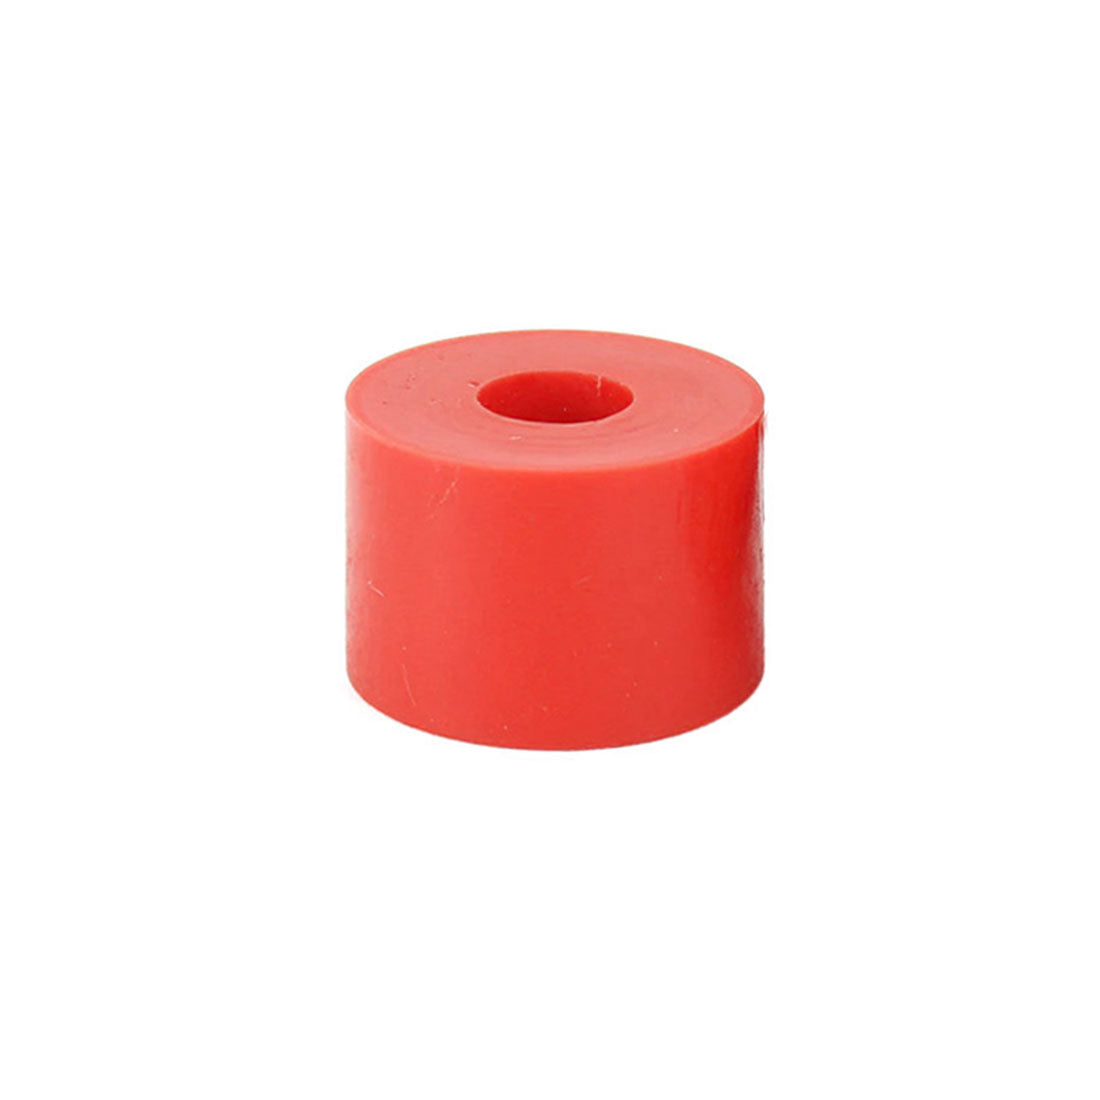 ABEC 11 Reflex Barrel Bushing - Single .650&quot; 92a - Red Skateboard Hardware and Parts